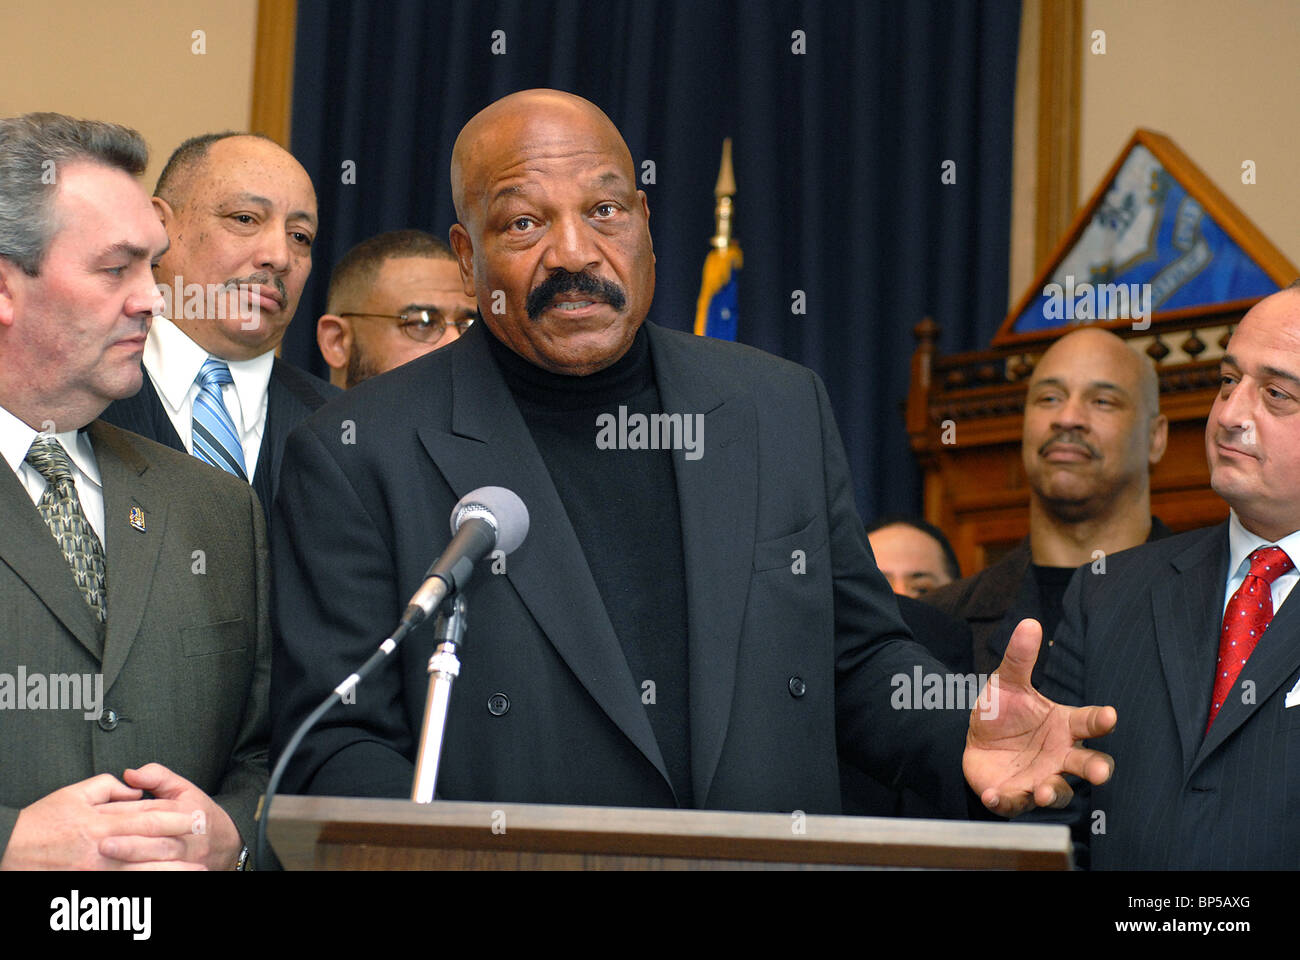 Football legend Jim Brown speaks during an event for his charity Amer-I-Can, which helps troubled youths. Hartford, CT USA Stock Photo